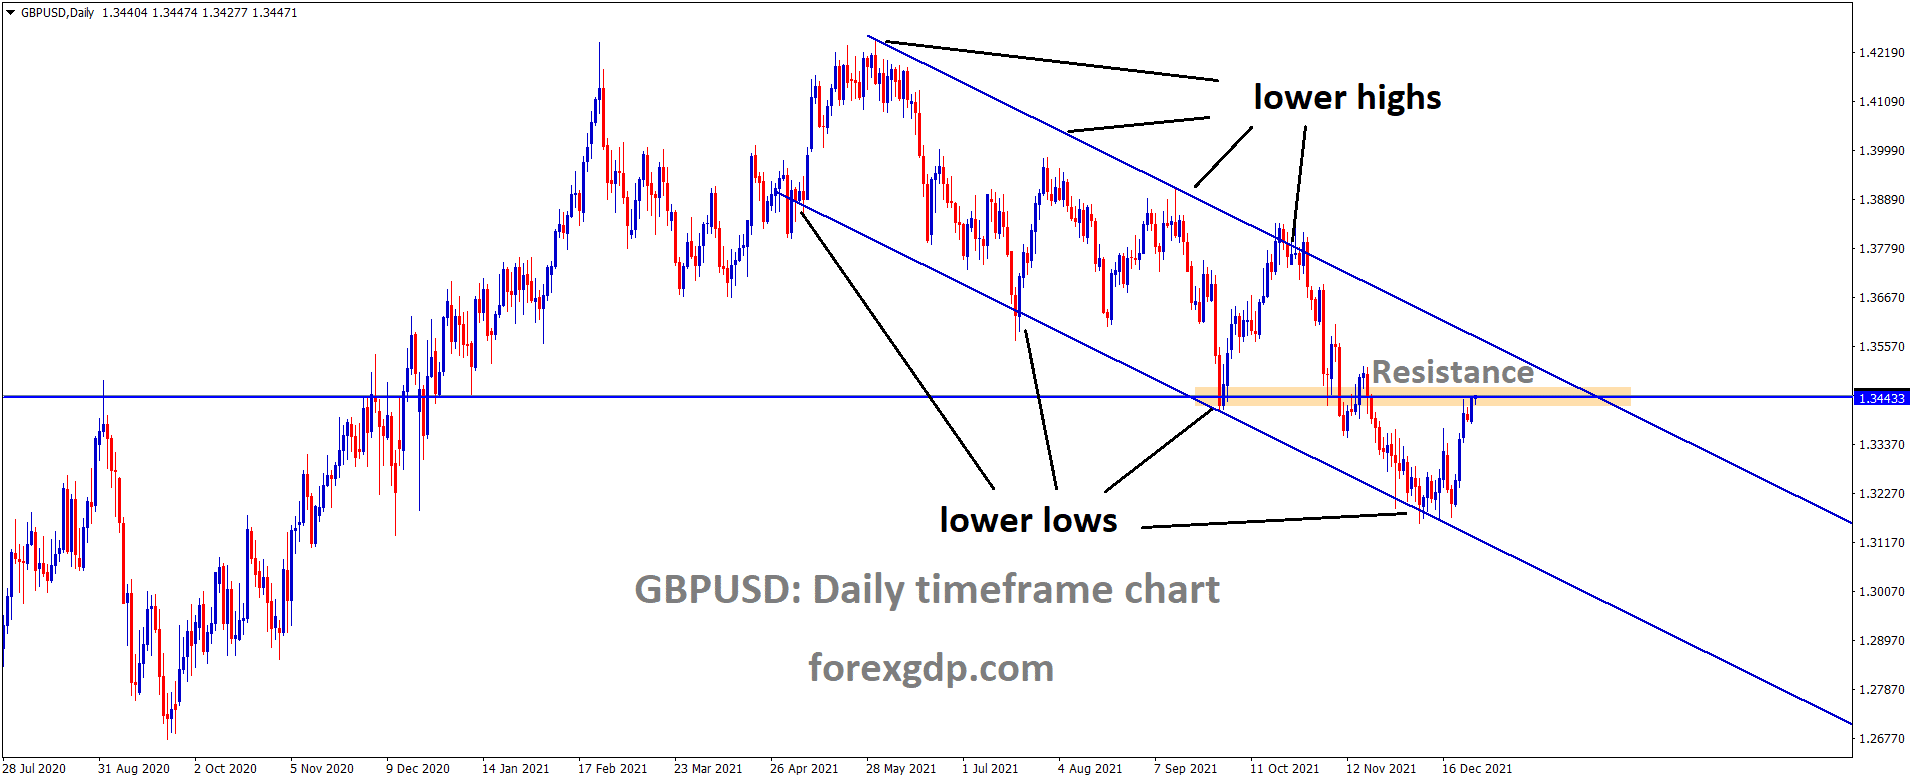 GBPUSD is moving in the Descending channel and the market has reached the horizontal resistance area of the channel